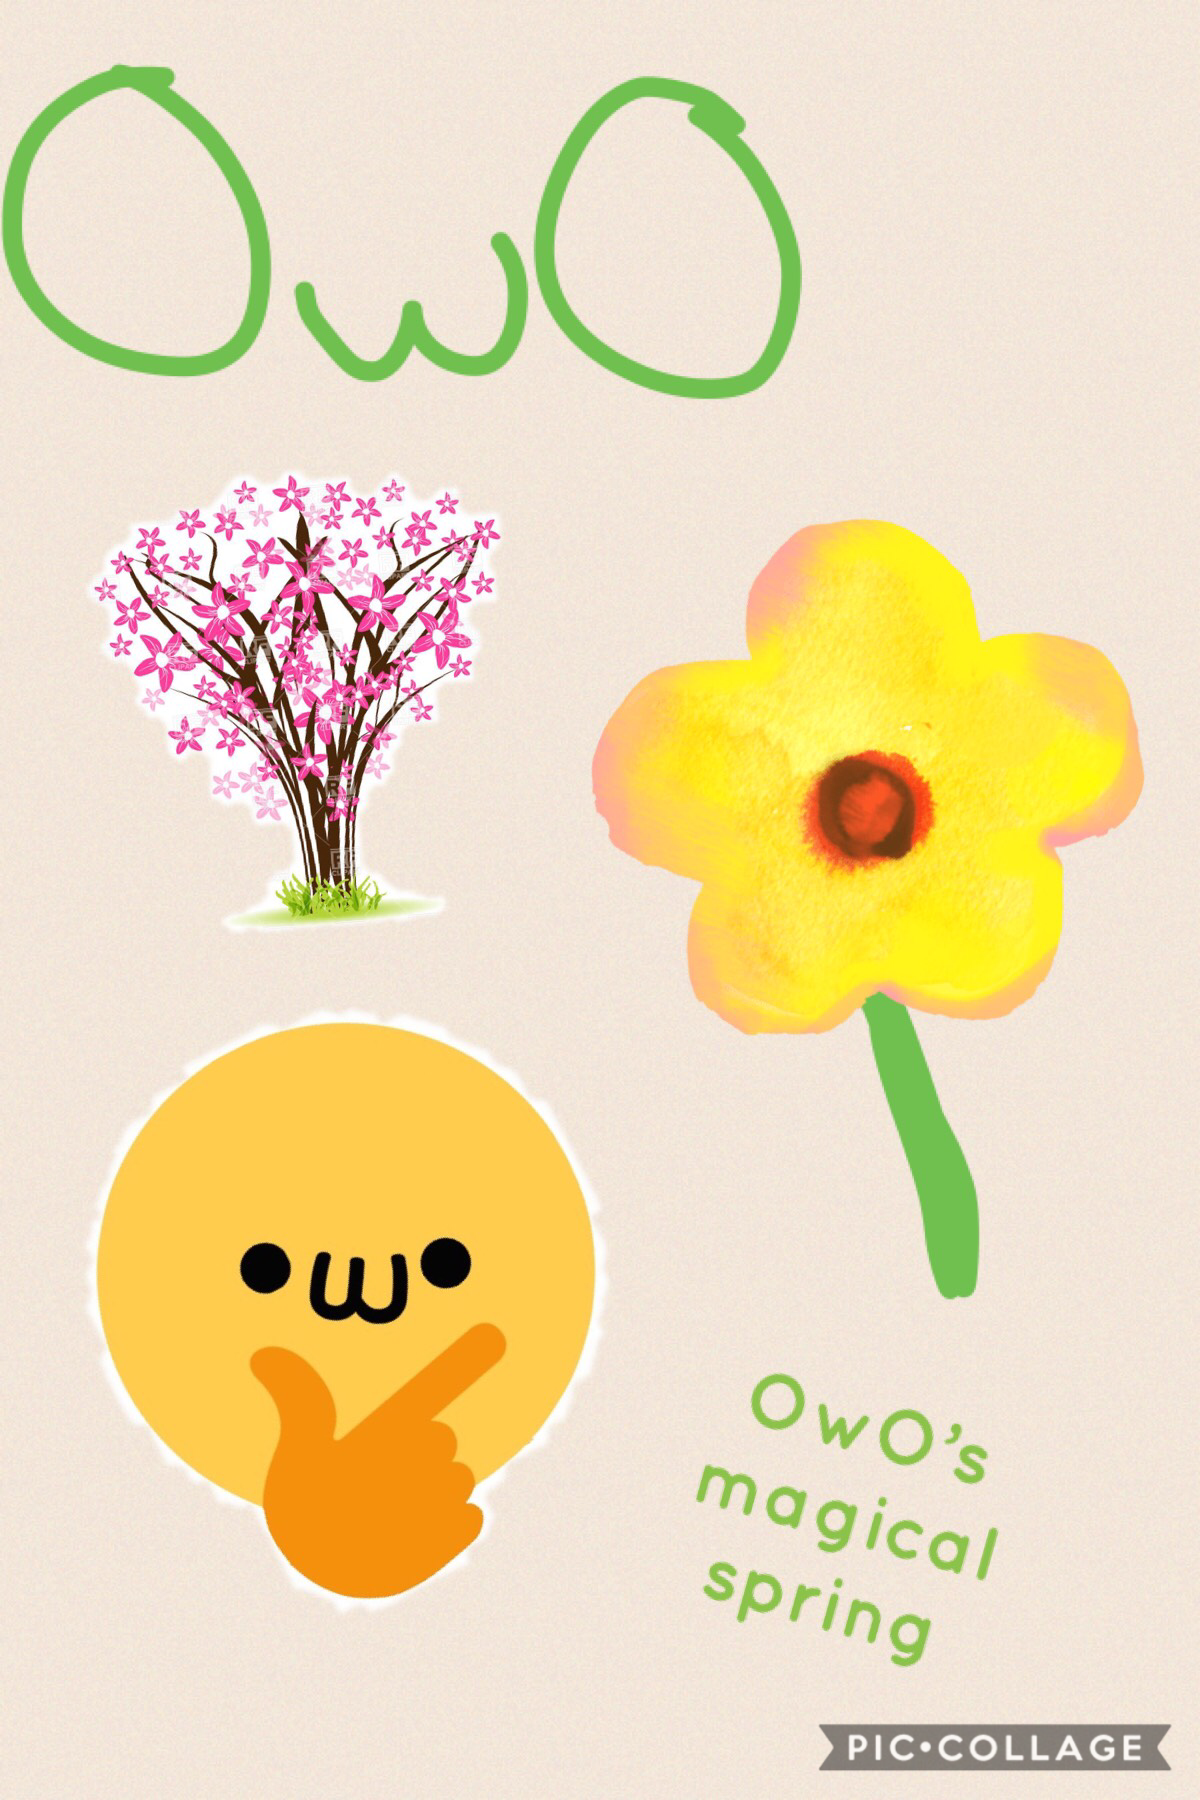 OwO’s magical spring!





Lol